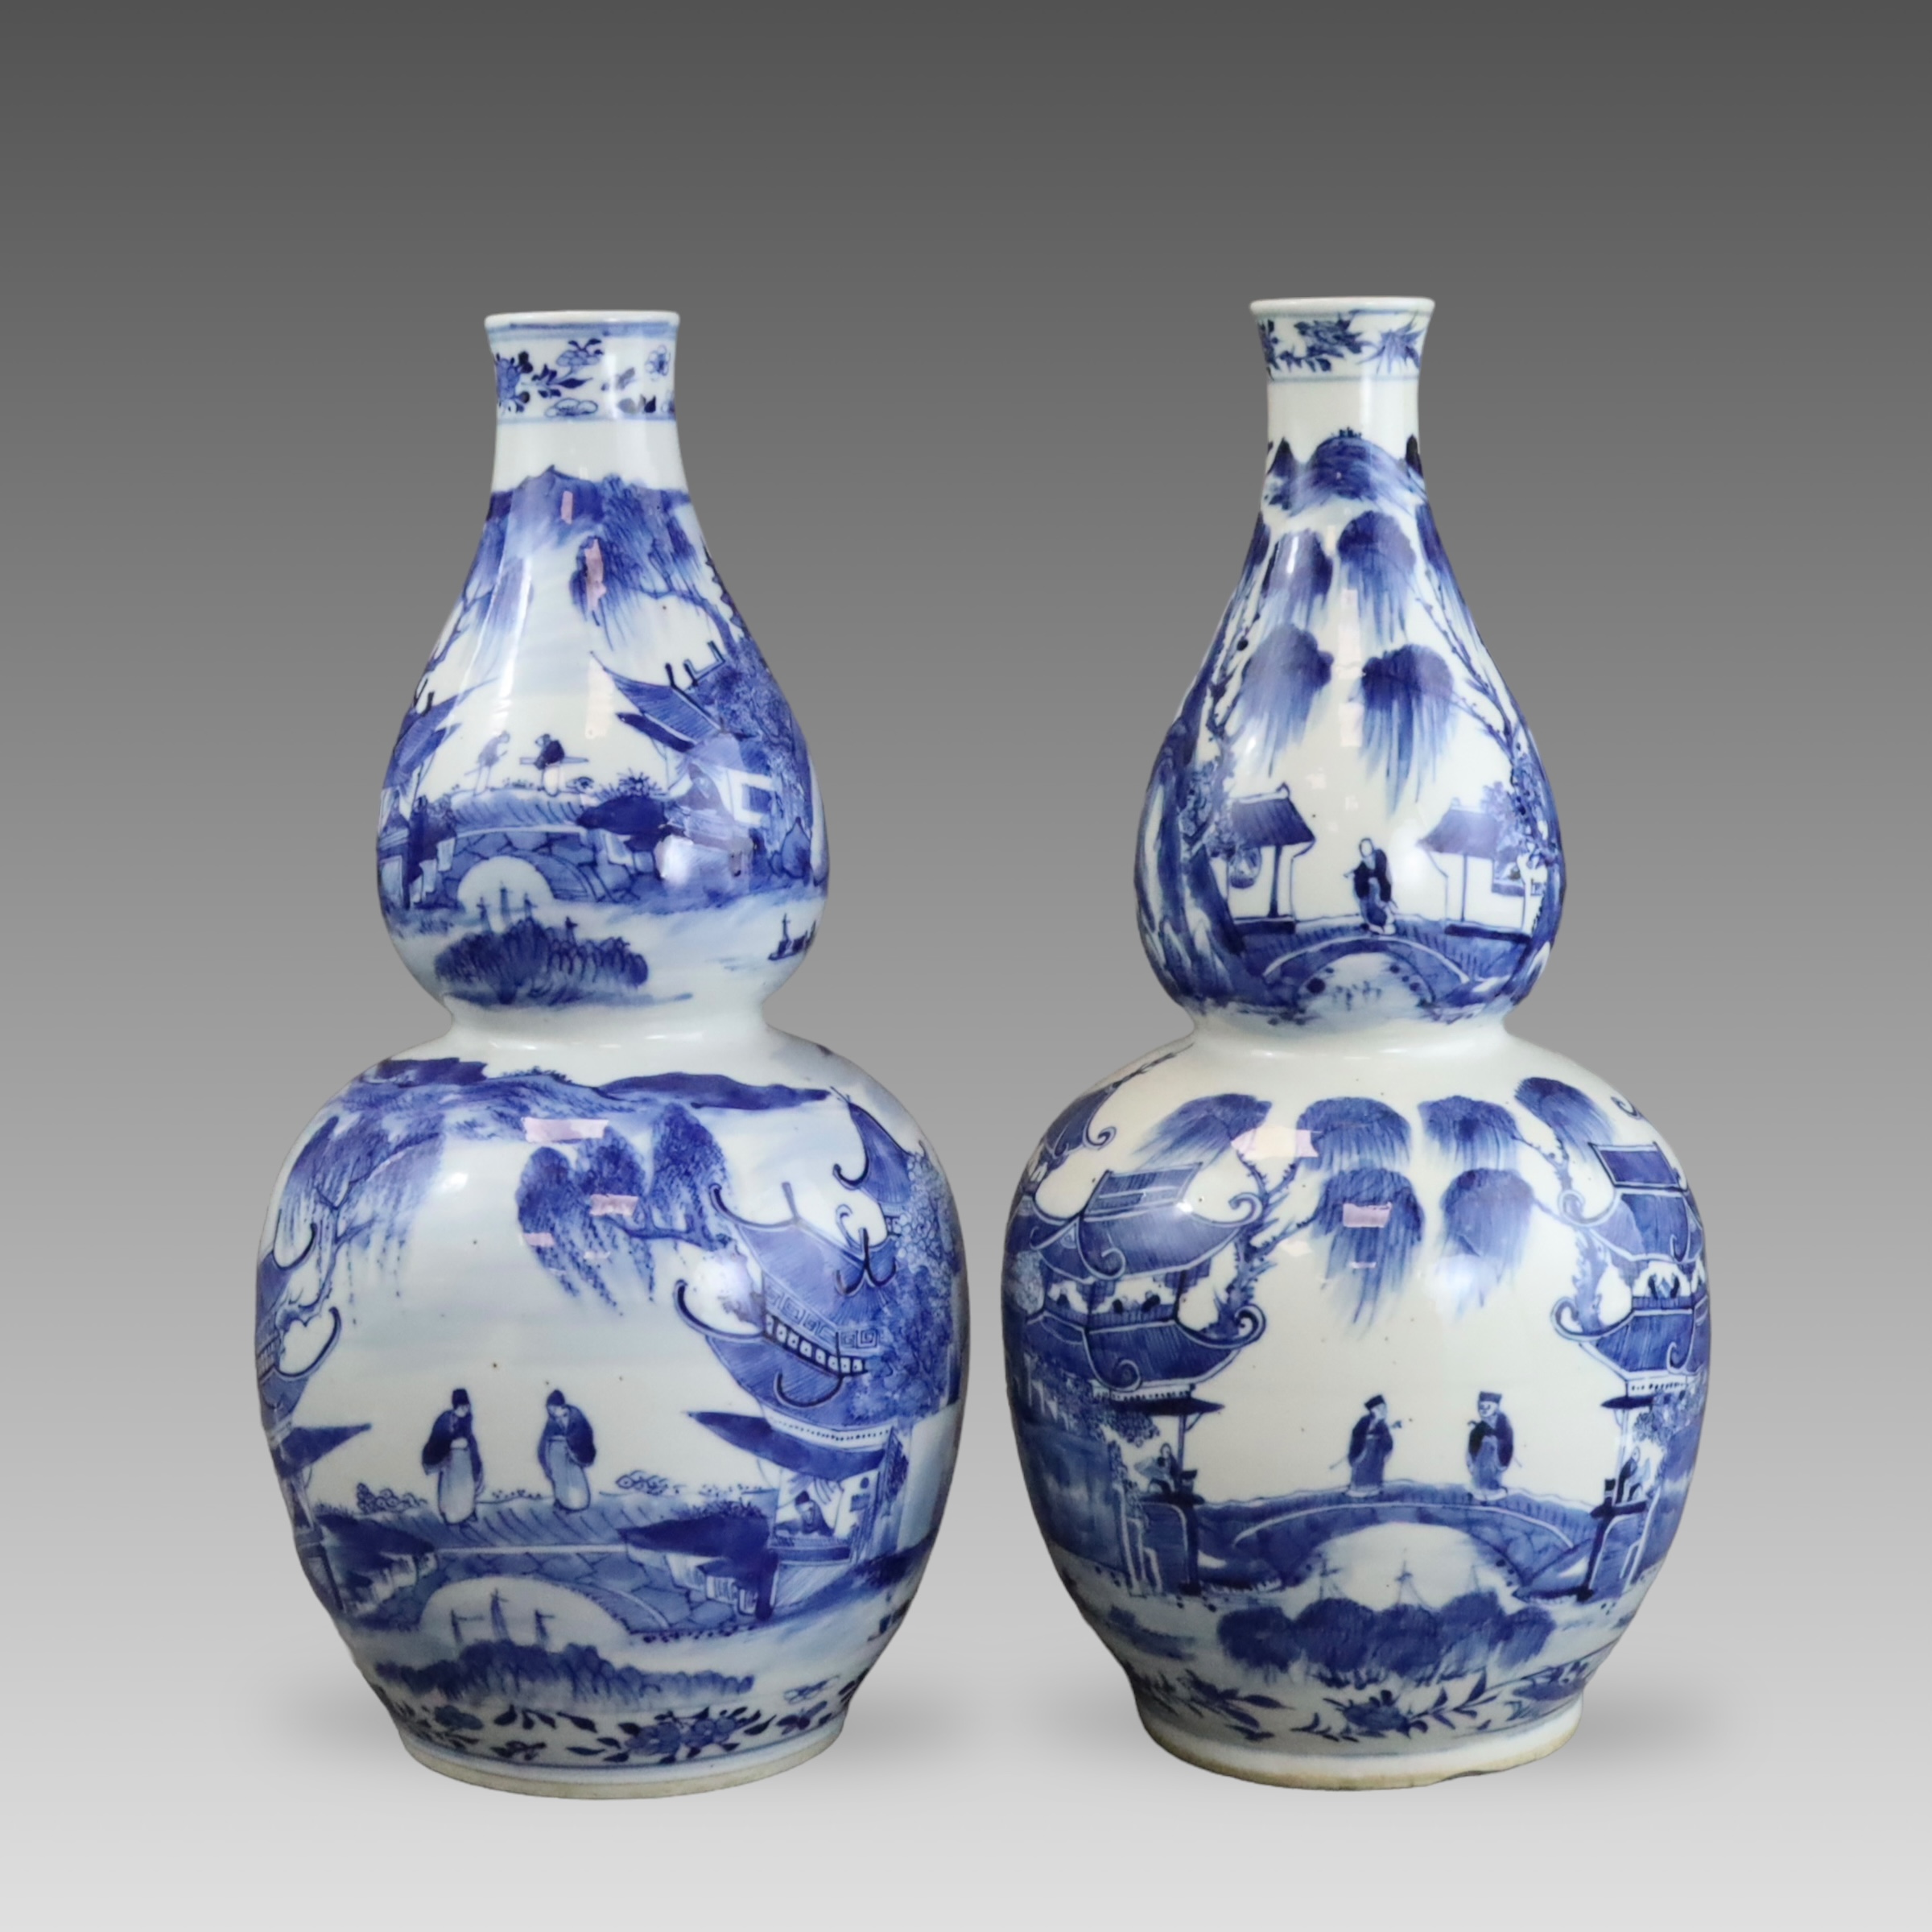 A Pair of Blue and White Double Gourd Vases, 19th century,